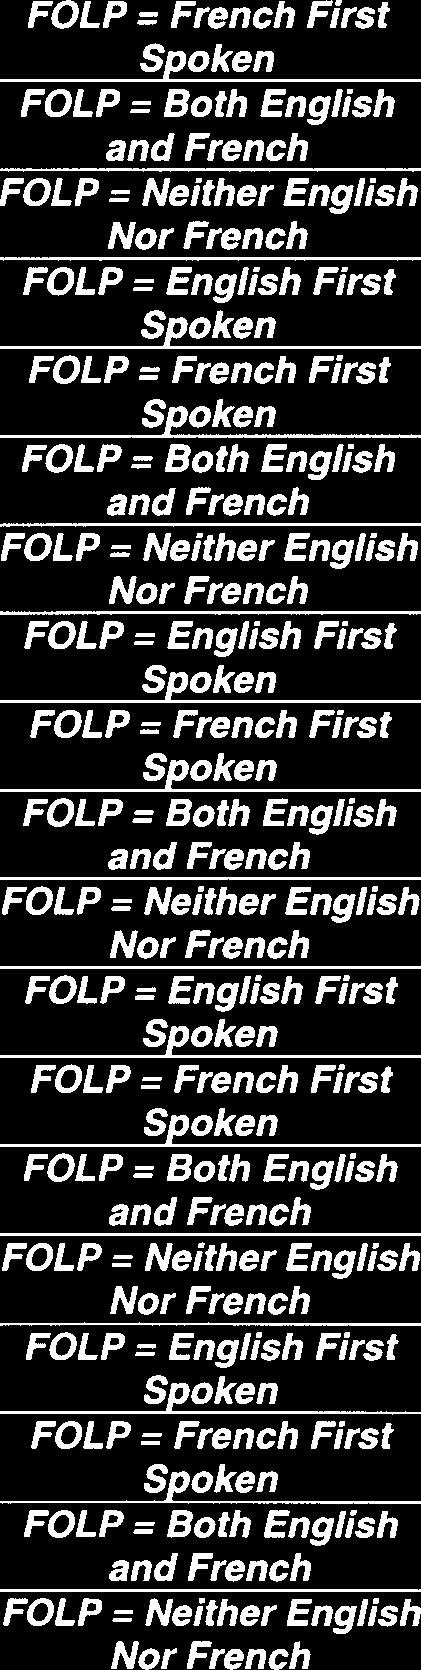 MASTER AGE GROUP = 25-6 years AGE GROUP = O- 12 years AGE GROUP = 13-24 years AGE GROUP = 25-6 years FOLP = French First Spoken